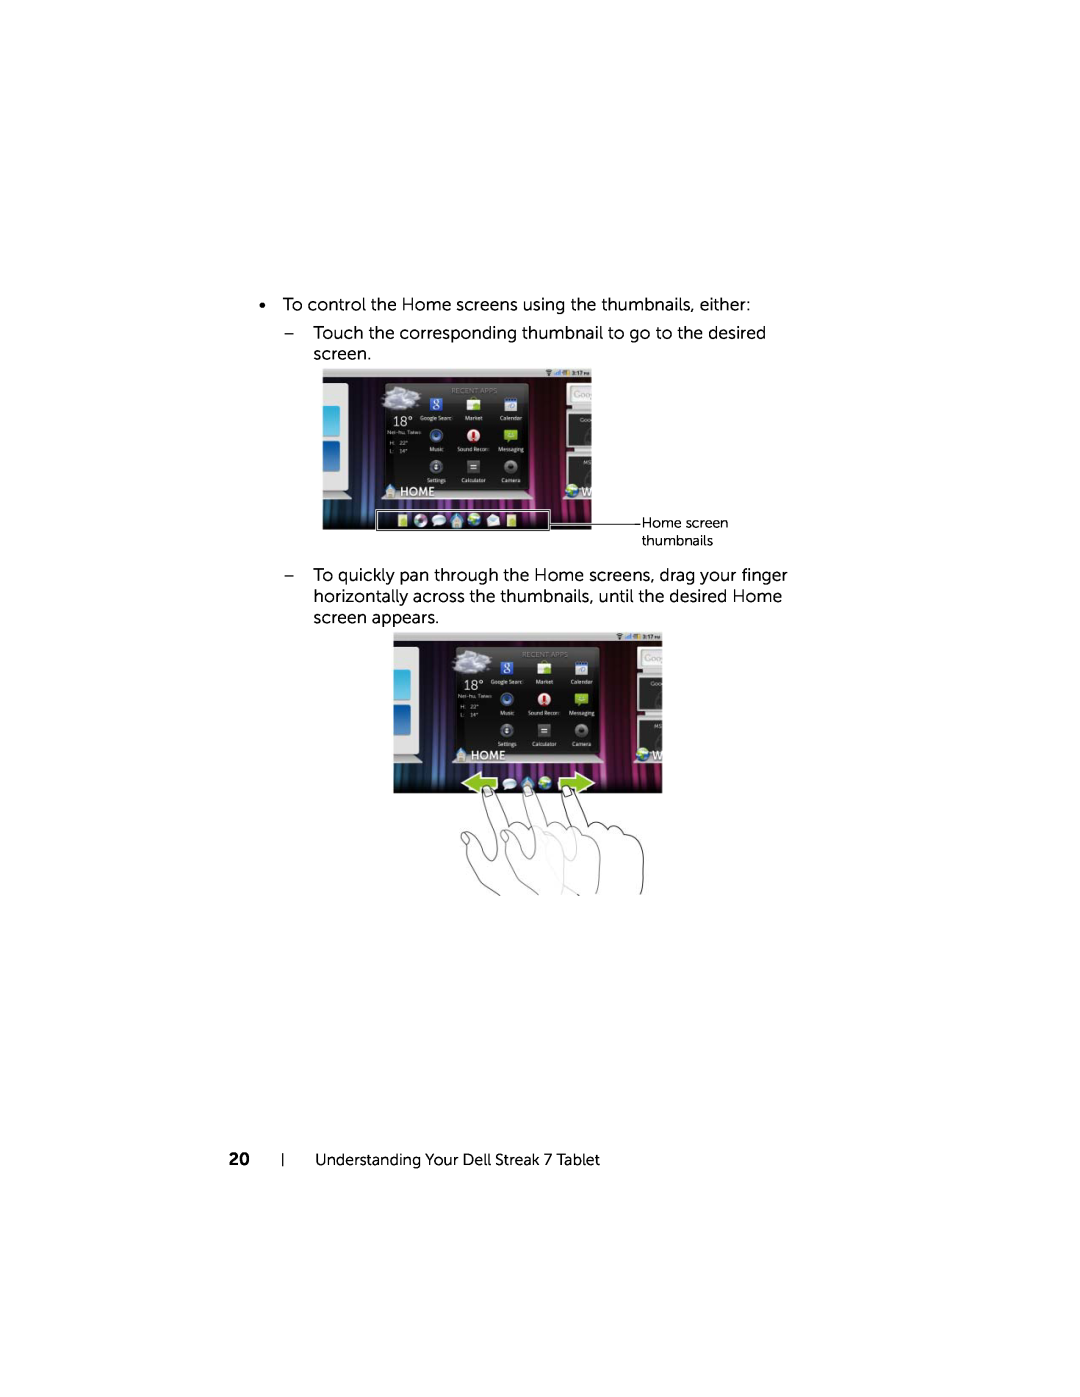 Dell 7 user manual To control the Home screens using the thumbnails, either, Home screen thumbnails 